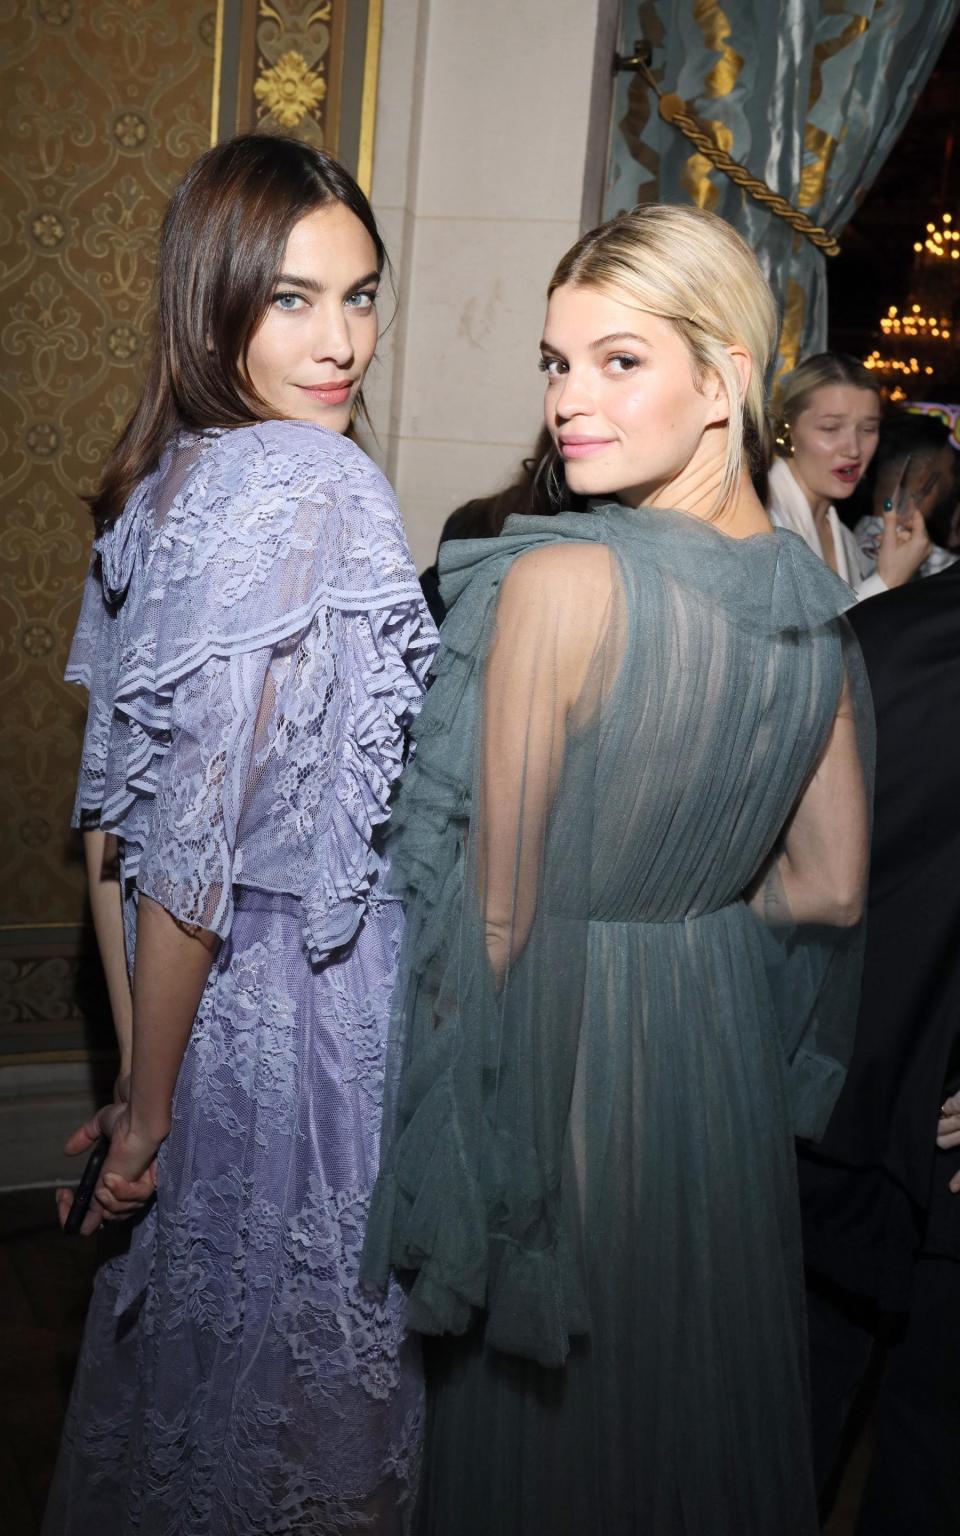 Alexa and Pixie Geldof - Victor Boyko/Getty Images for The Business of Fashion